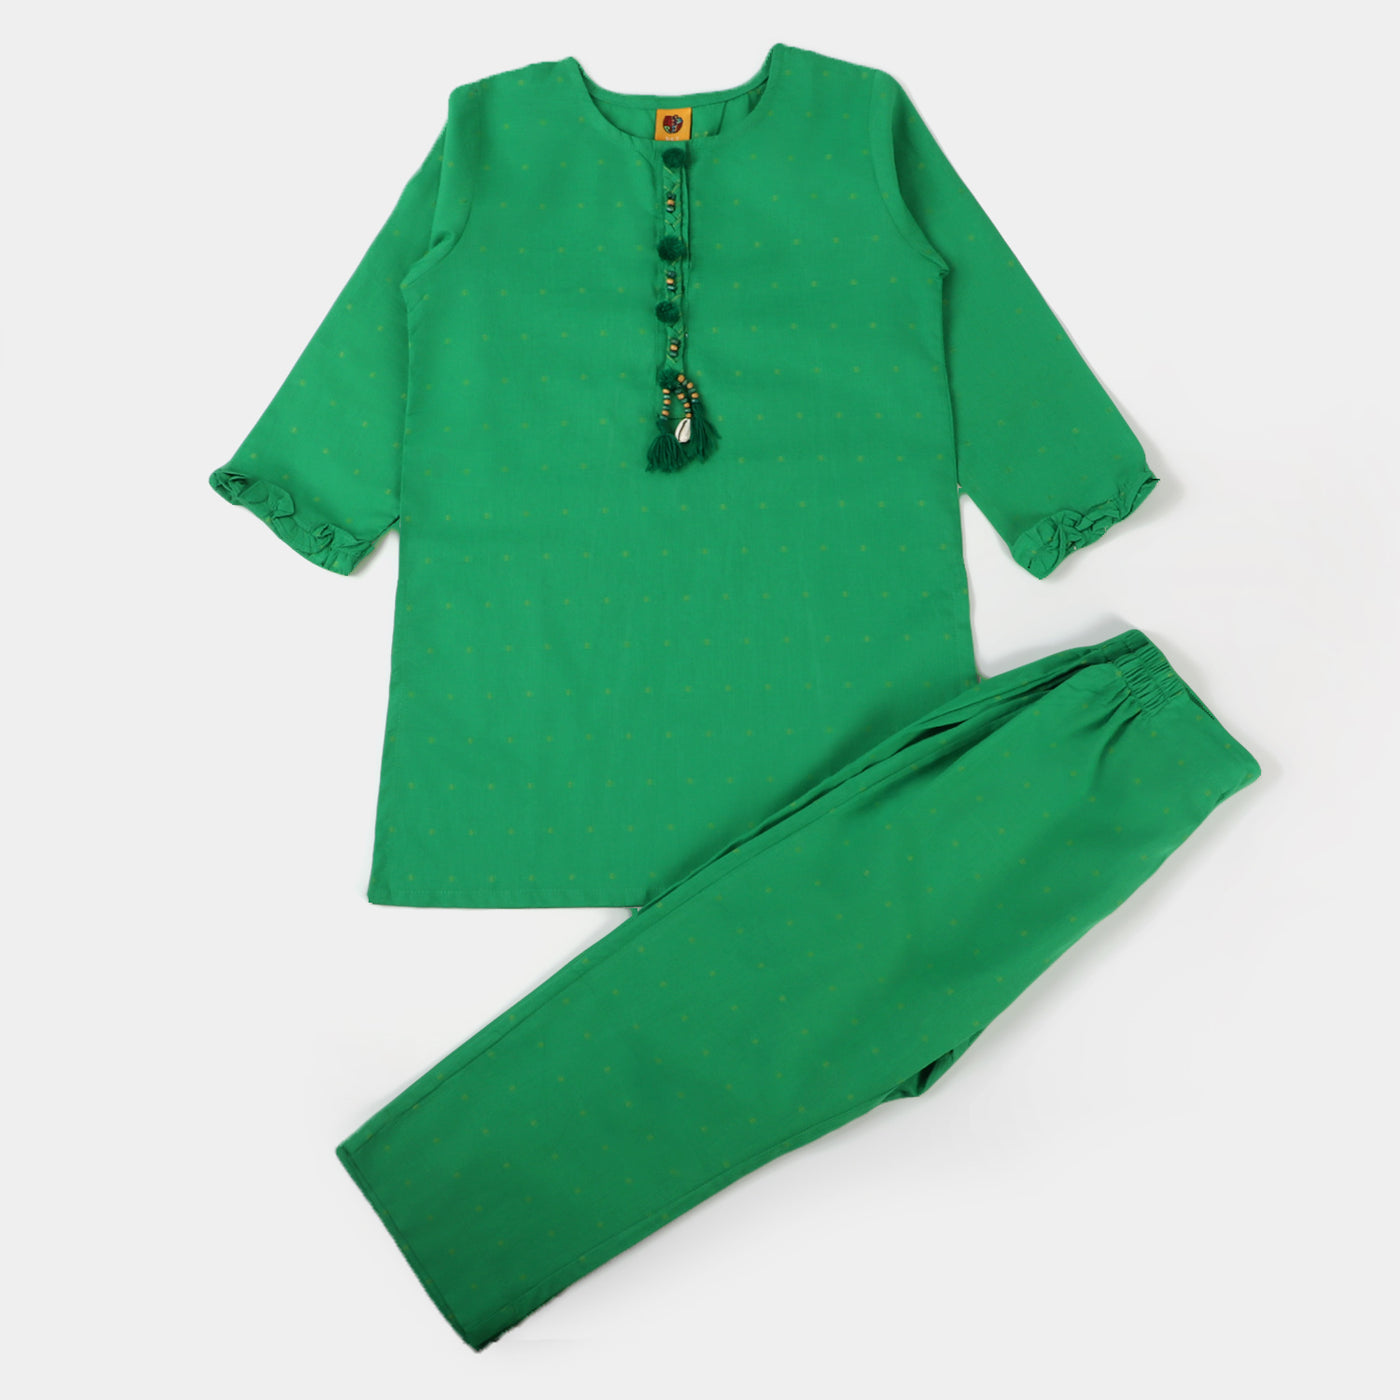 Girls Jacquard independence Co-ord set Go Green - Green